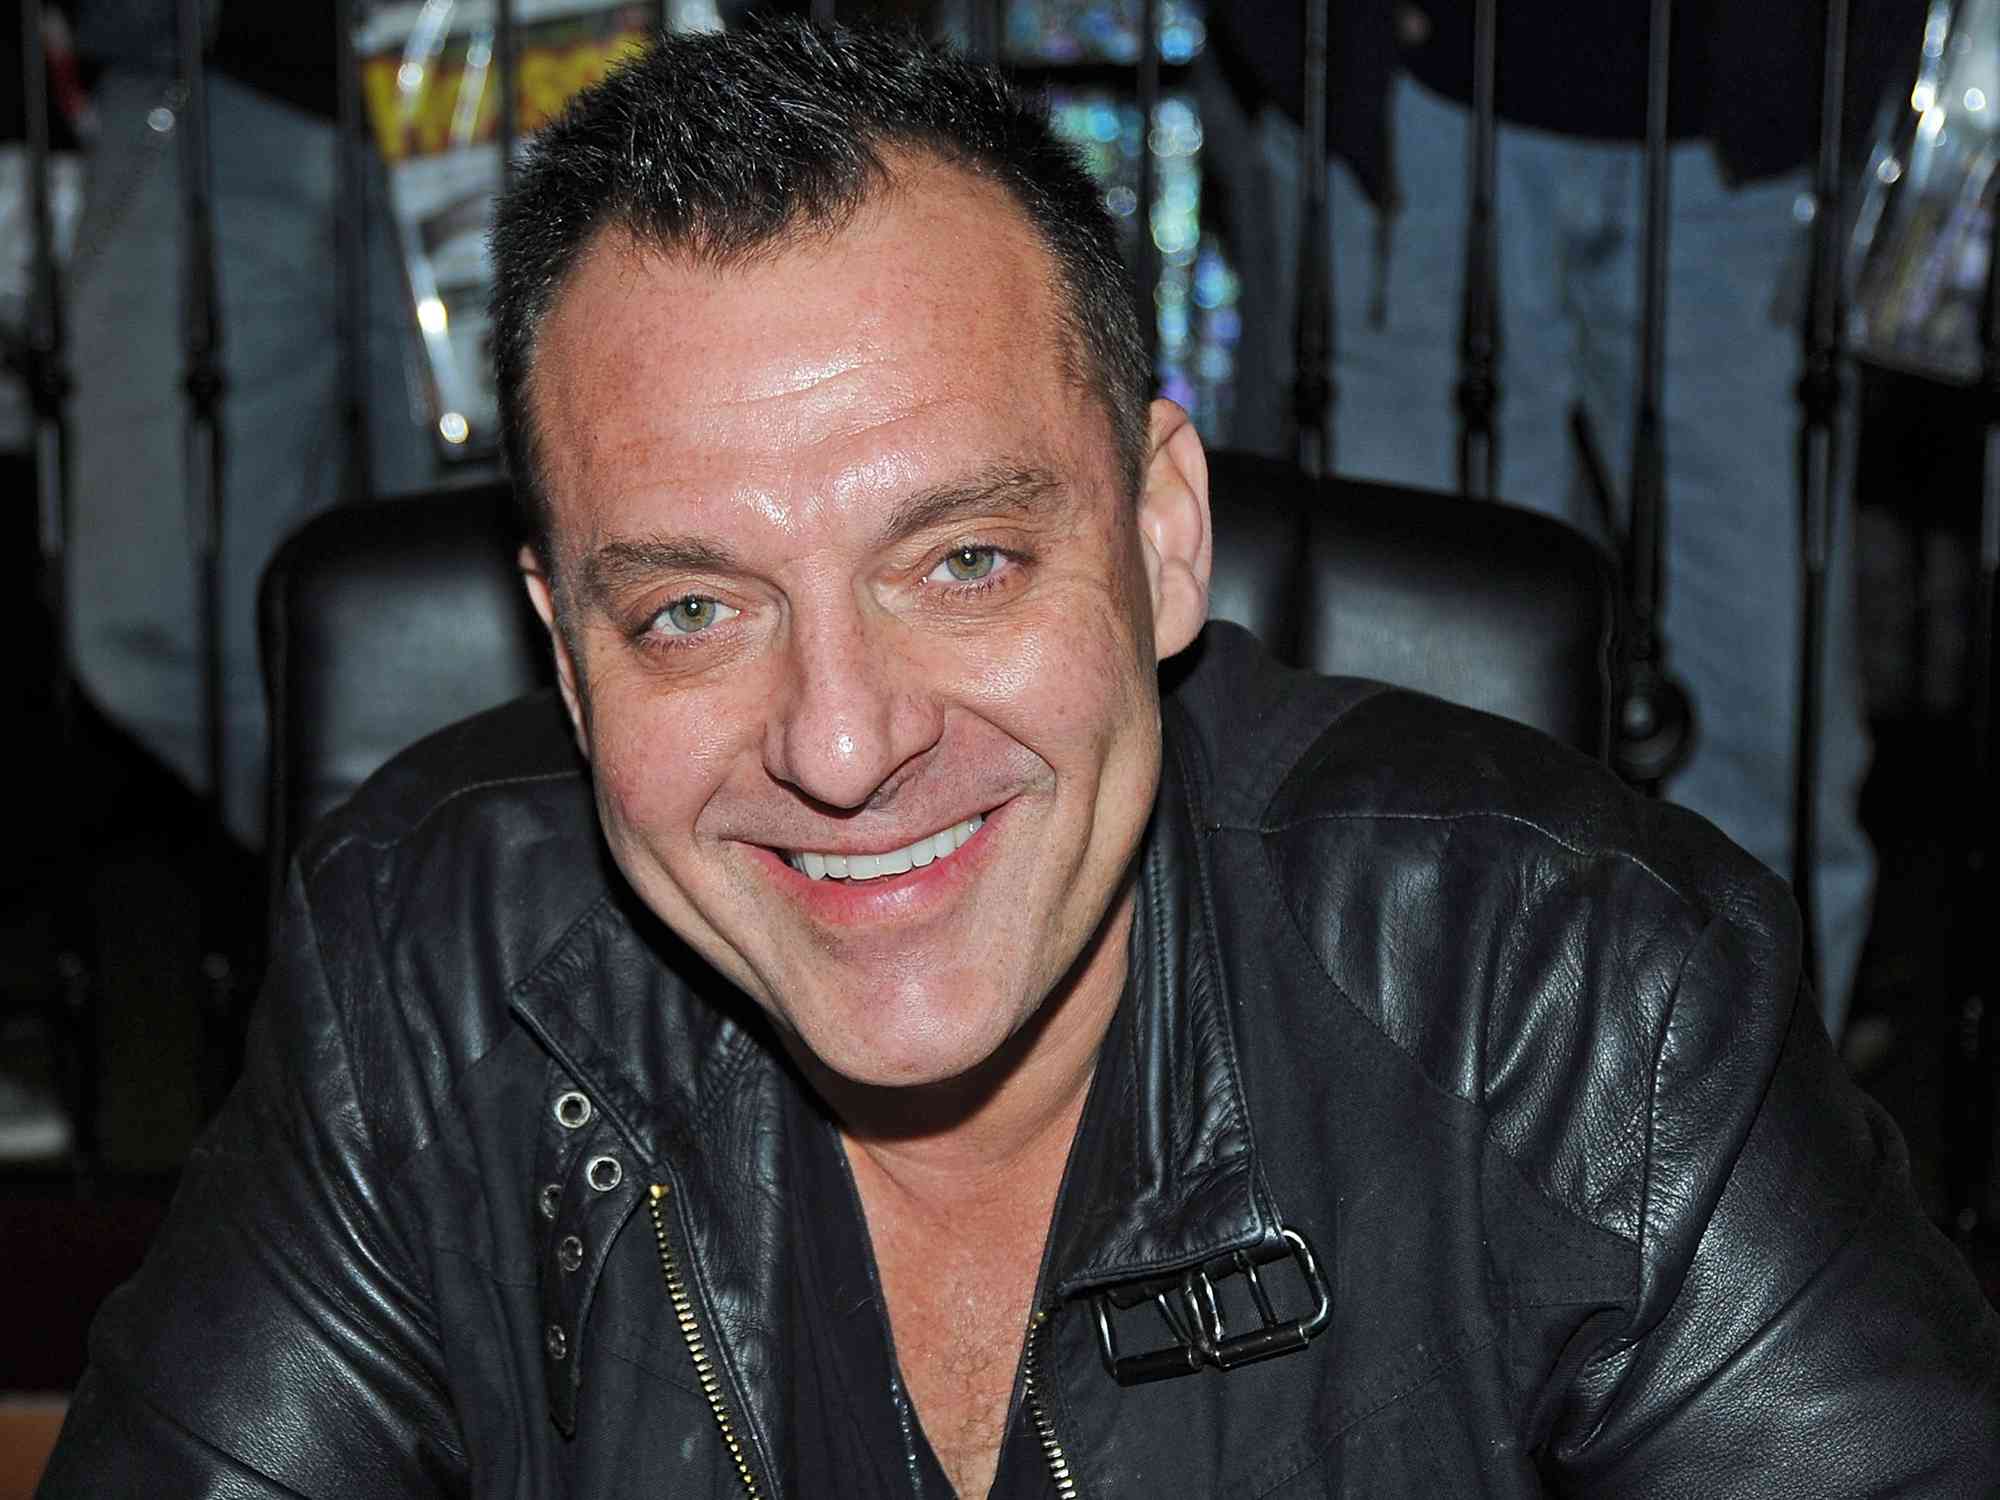 Tom Sizemore attends Day 1 of the 2010 Chiller Theatre Expo at Hilton on October 29, 2010 in Parsippany, New Jersey